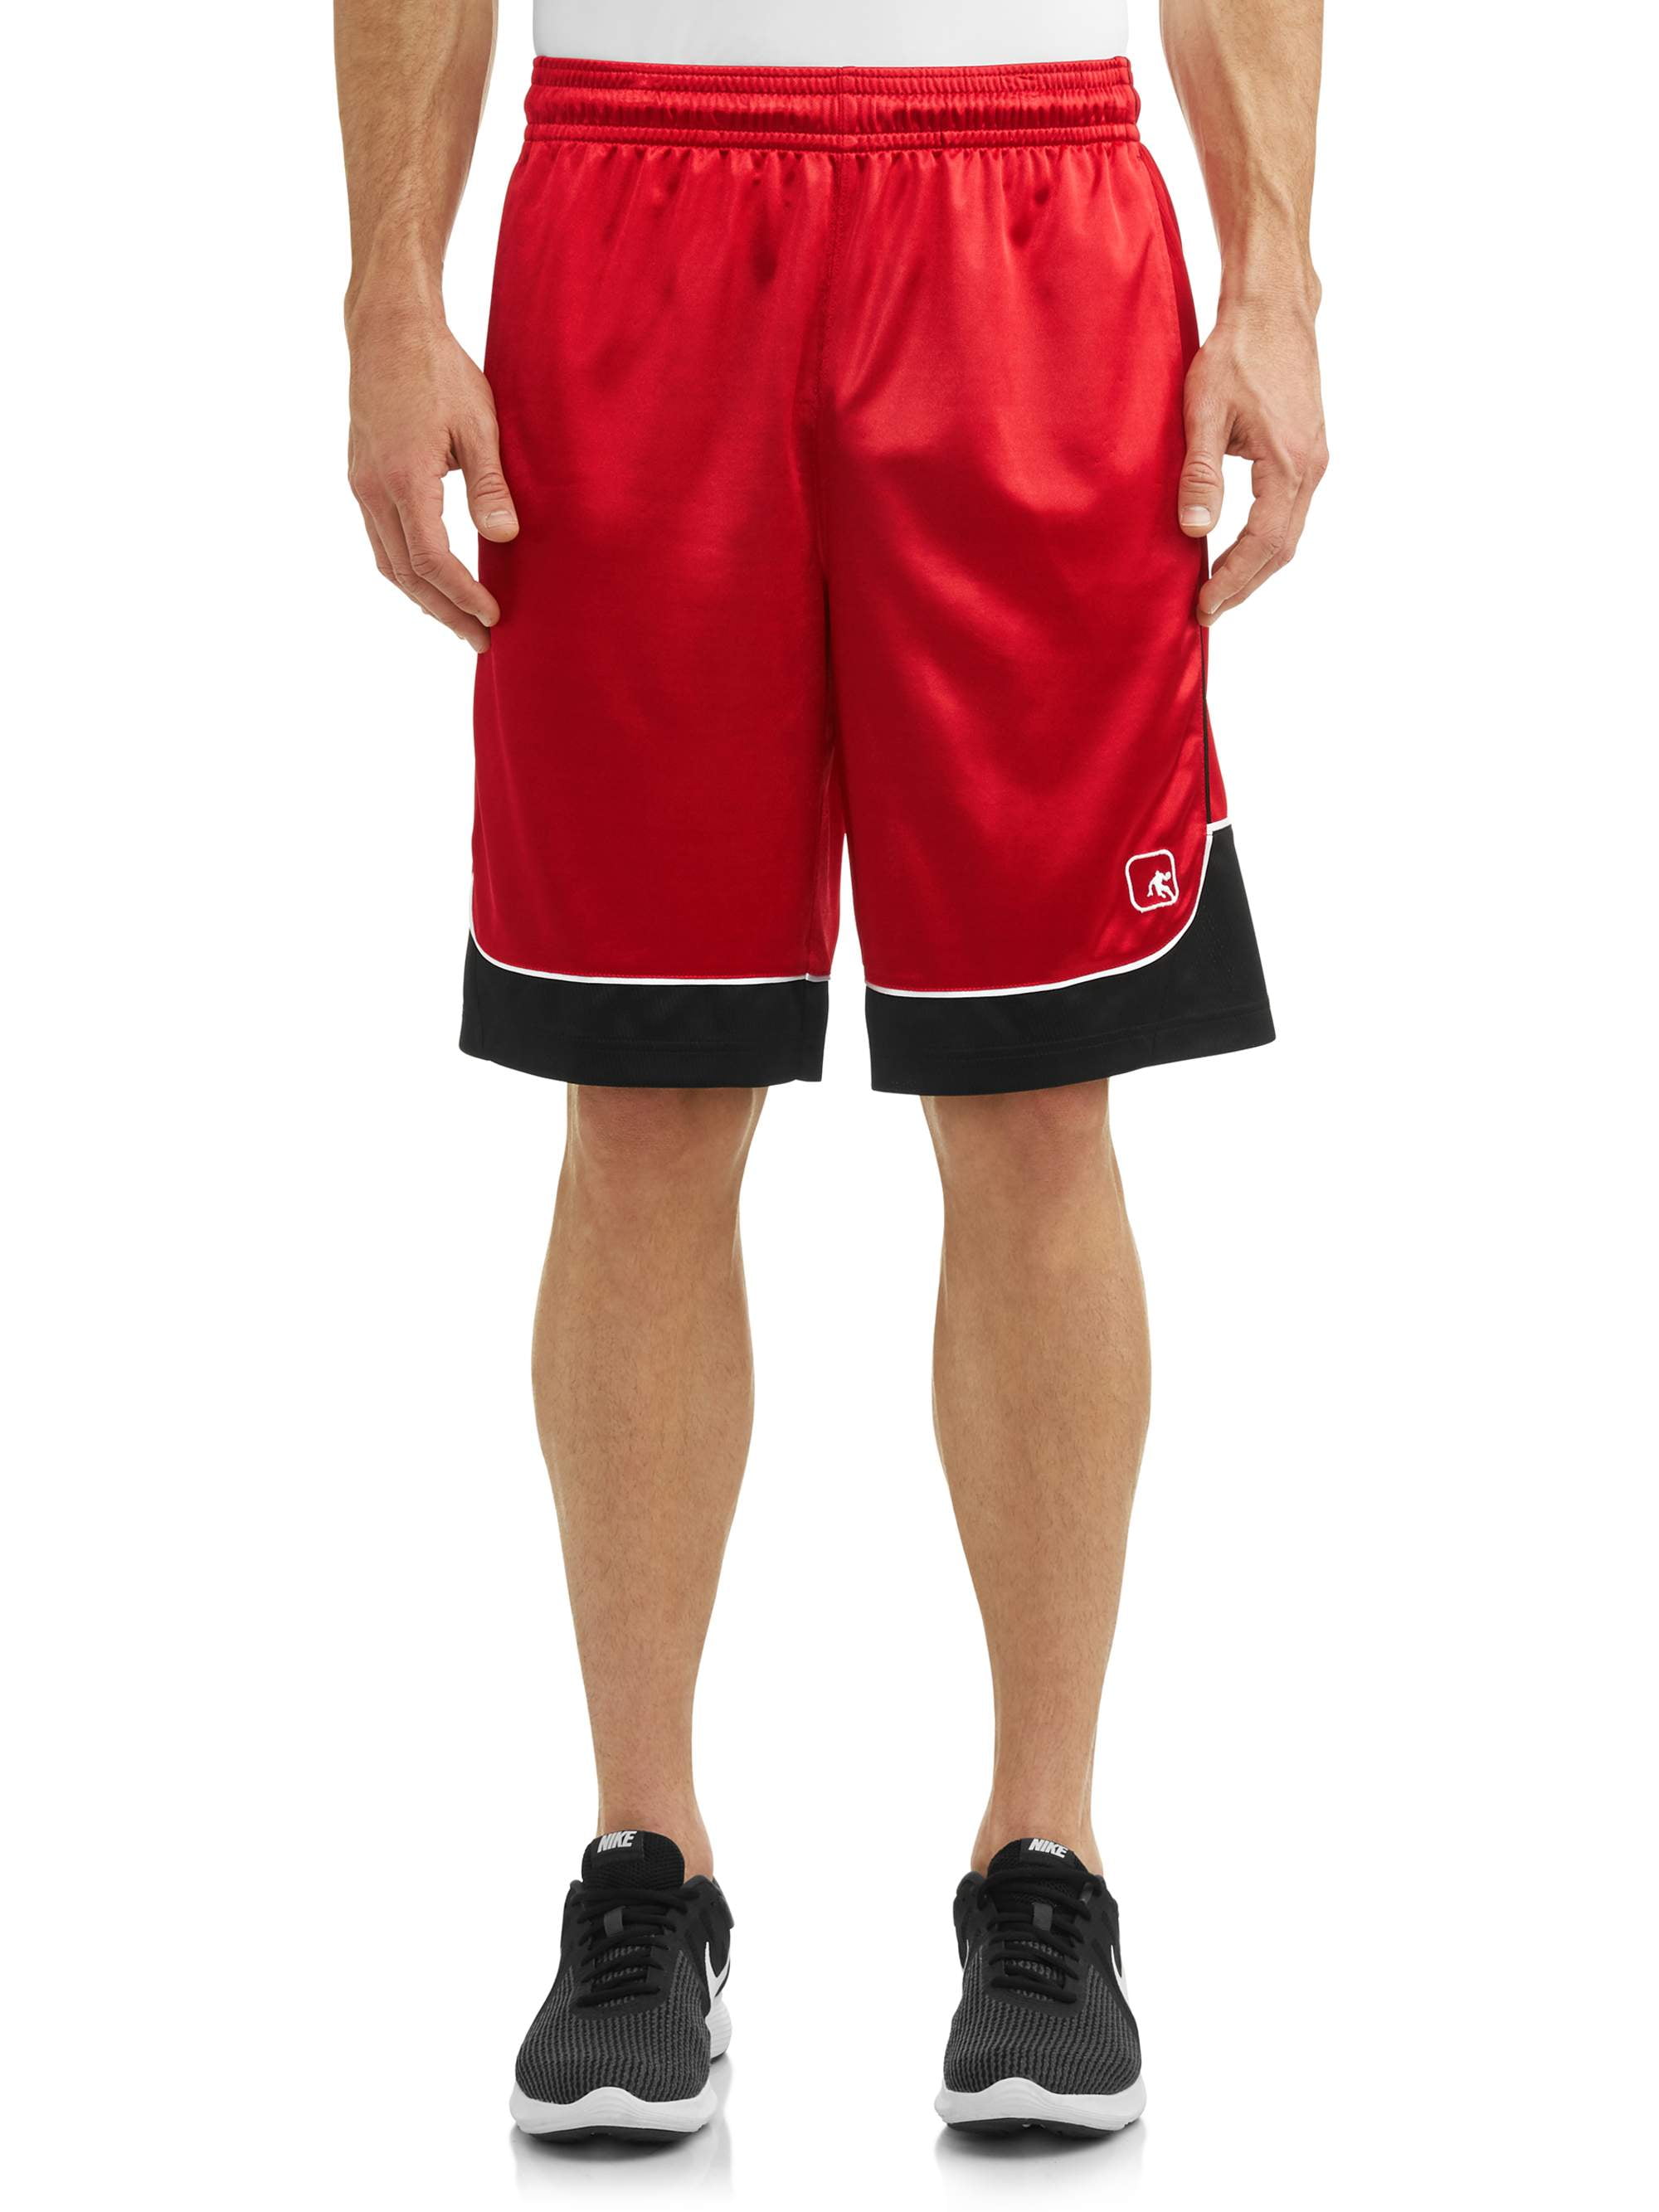 AND1 Men's Colorblock Basketball Shorts, Up to 5XL 